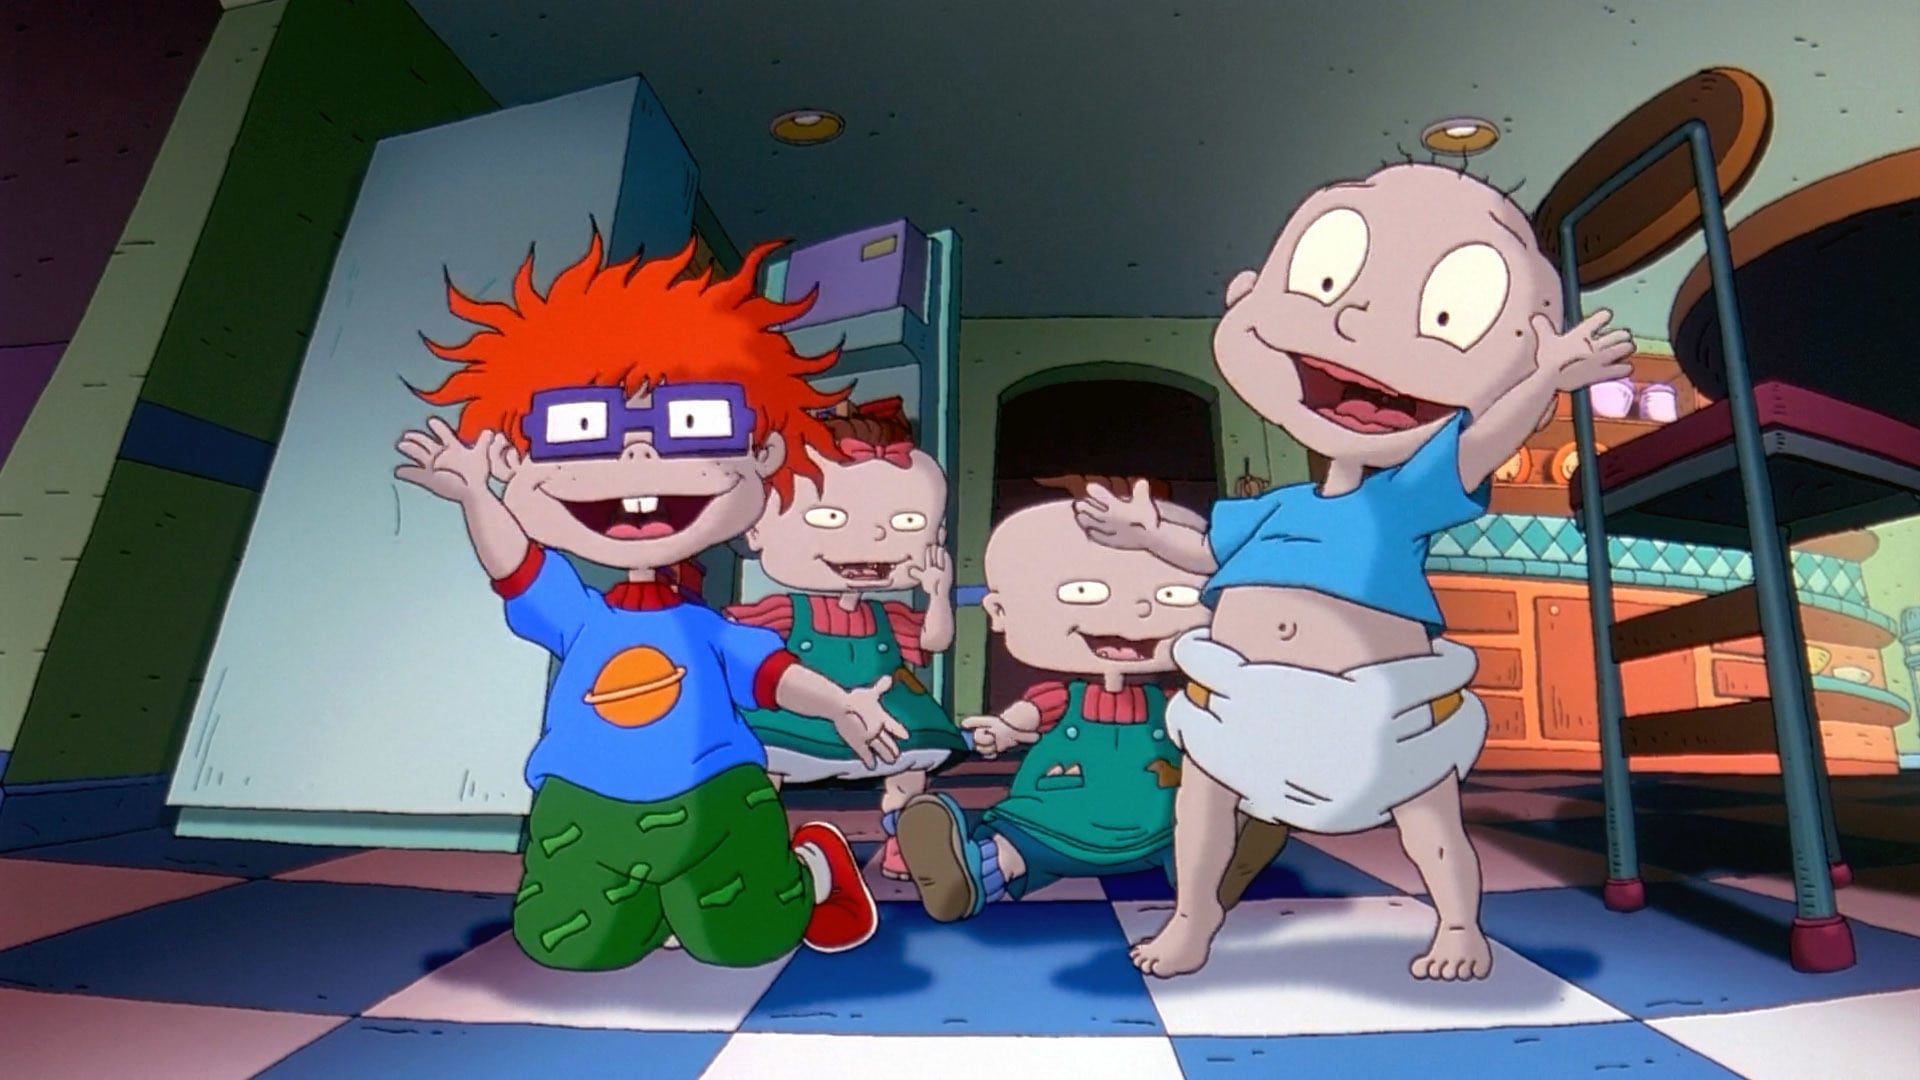 Rugrats Gets Nickelodeon Reboot & Live-Action Movie in 2020.